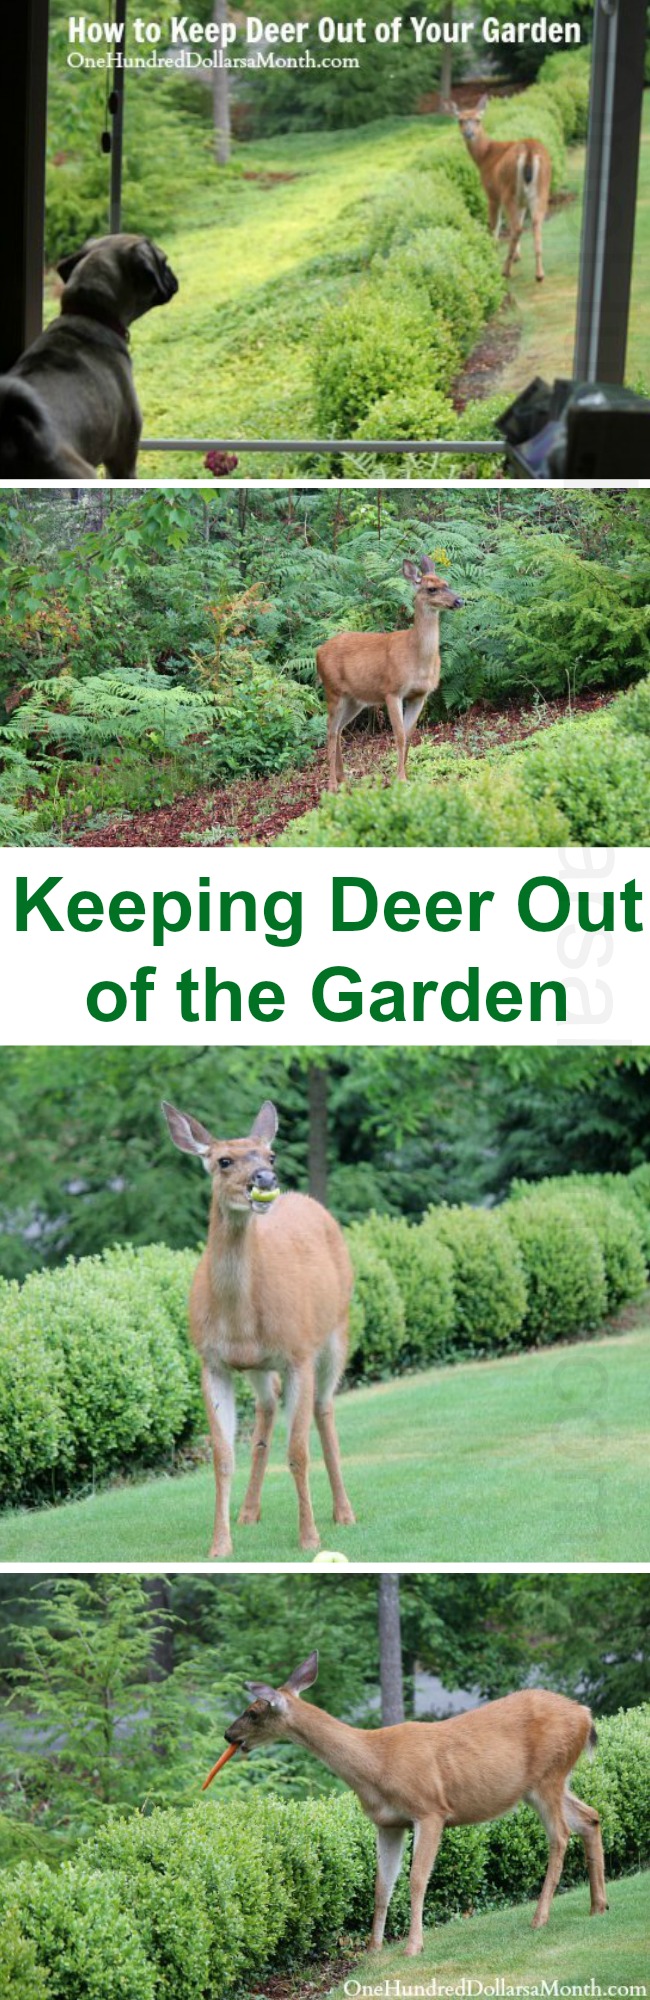 How to Keep Deer Out of Your Garden – Stop Feeding Them!